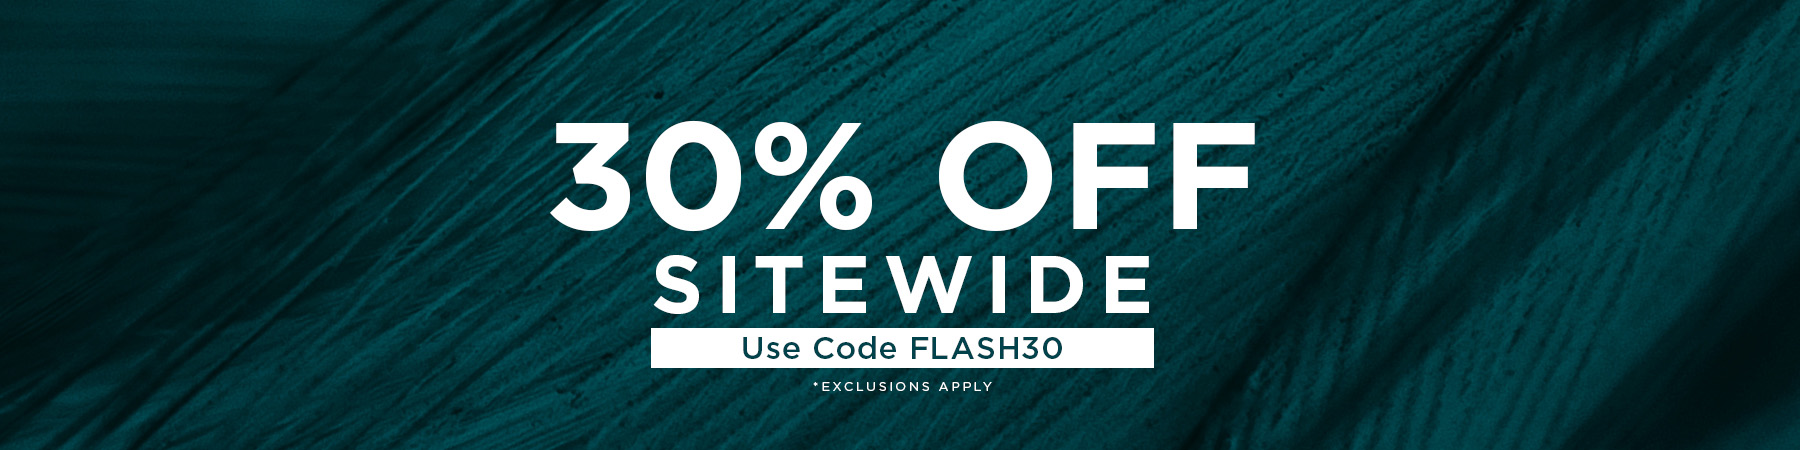 30% off Sitewide with Code SAVE30